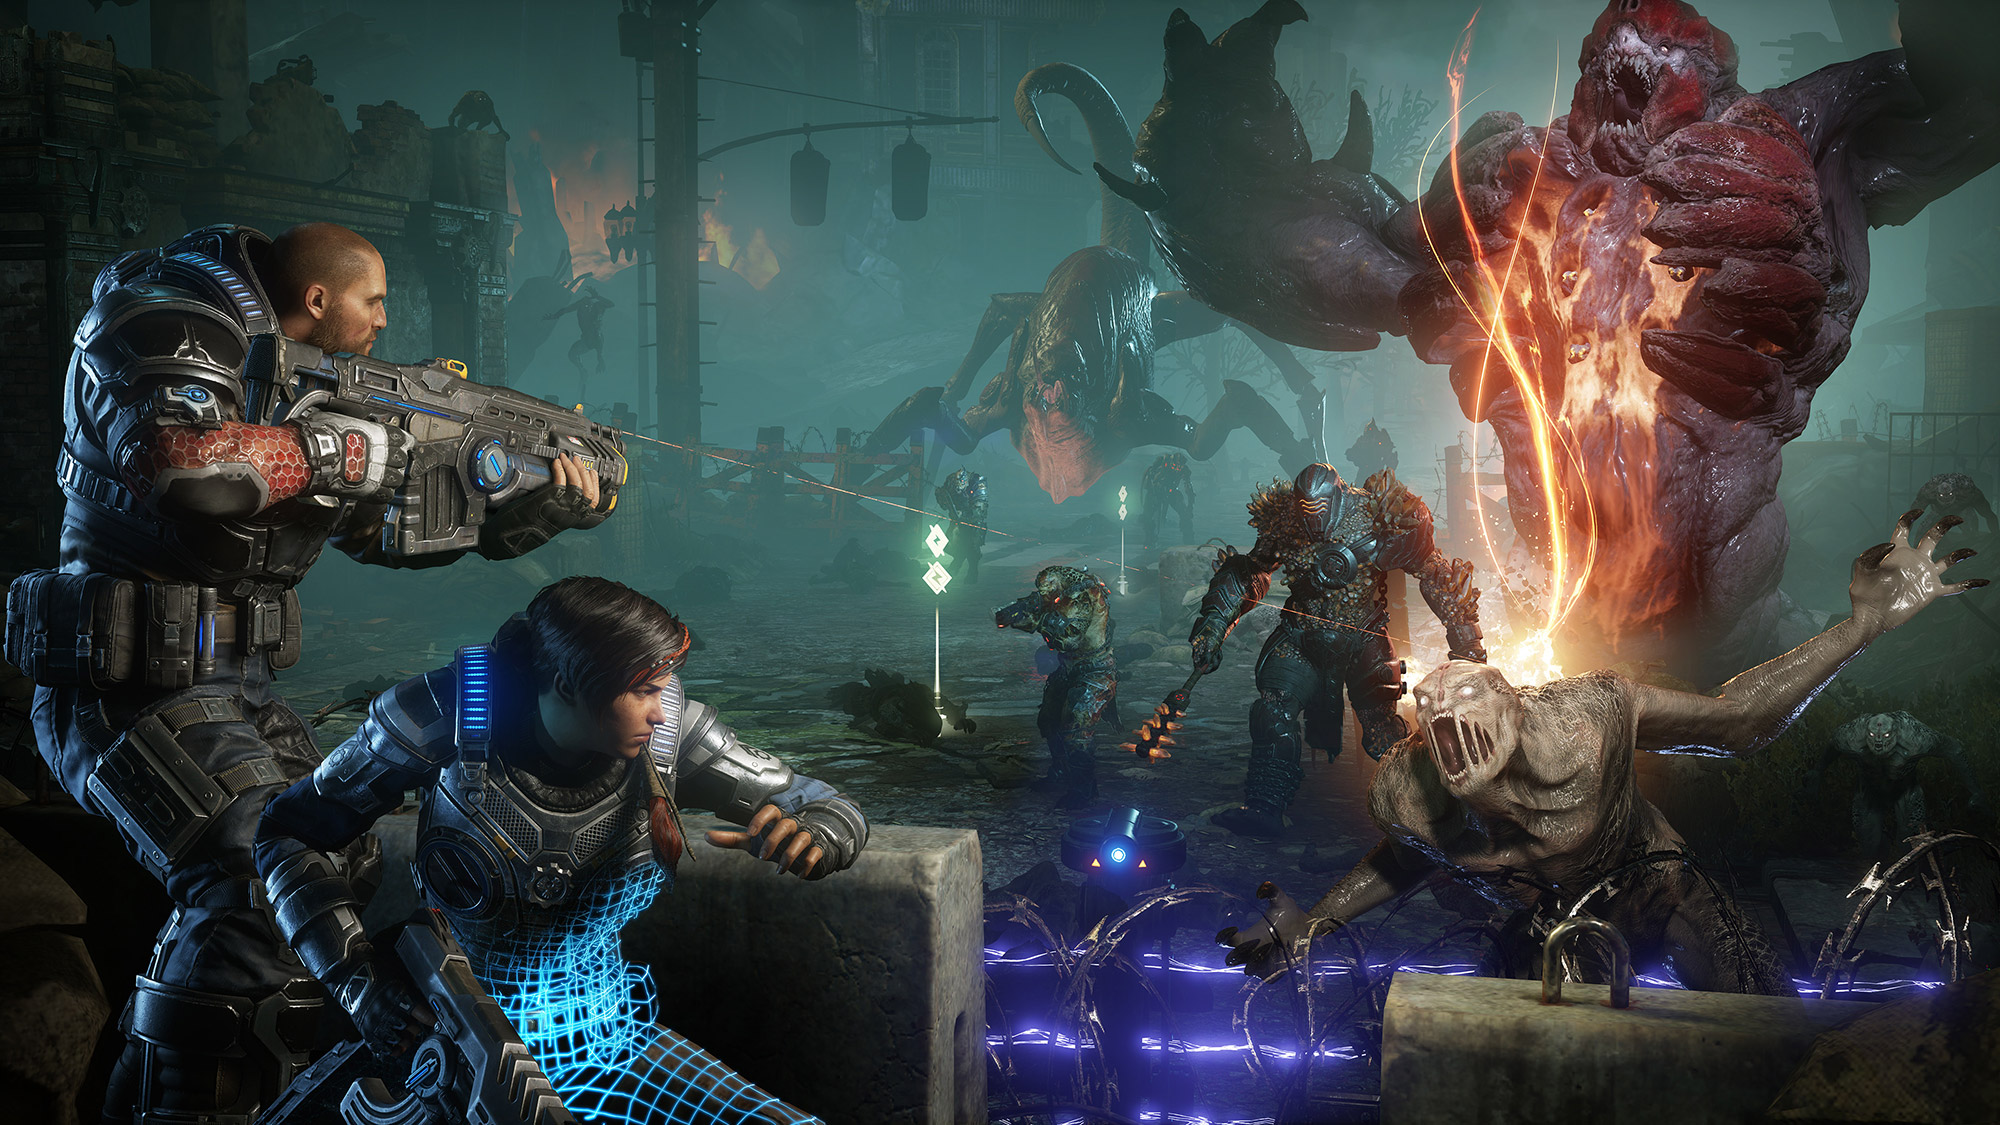 Make the most of Gears 5 multiplayer